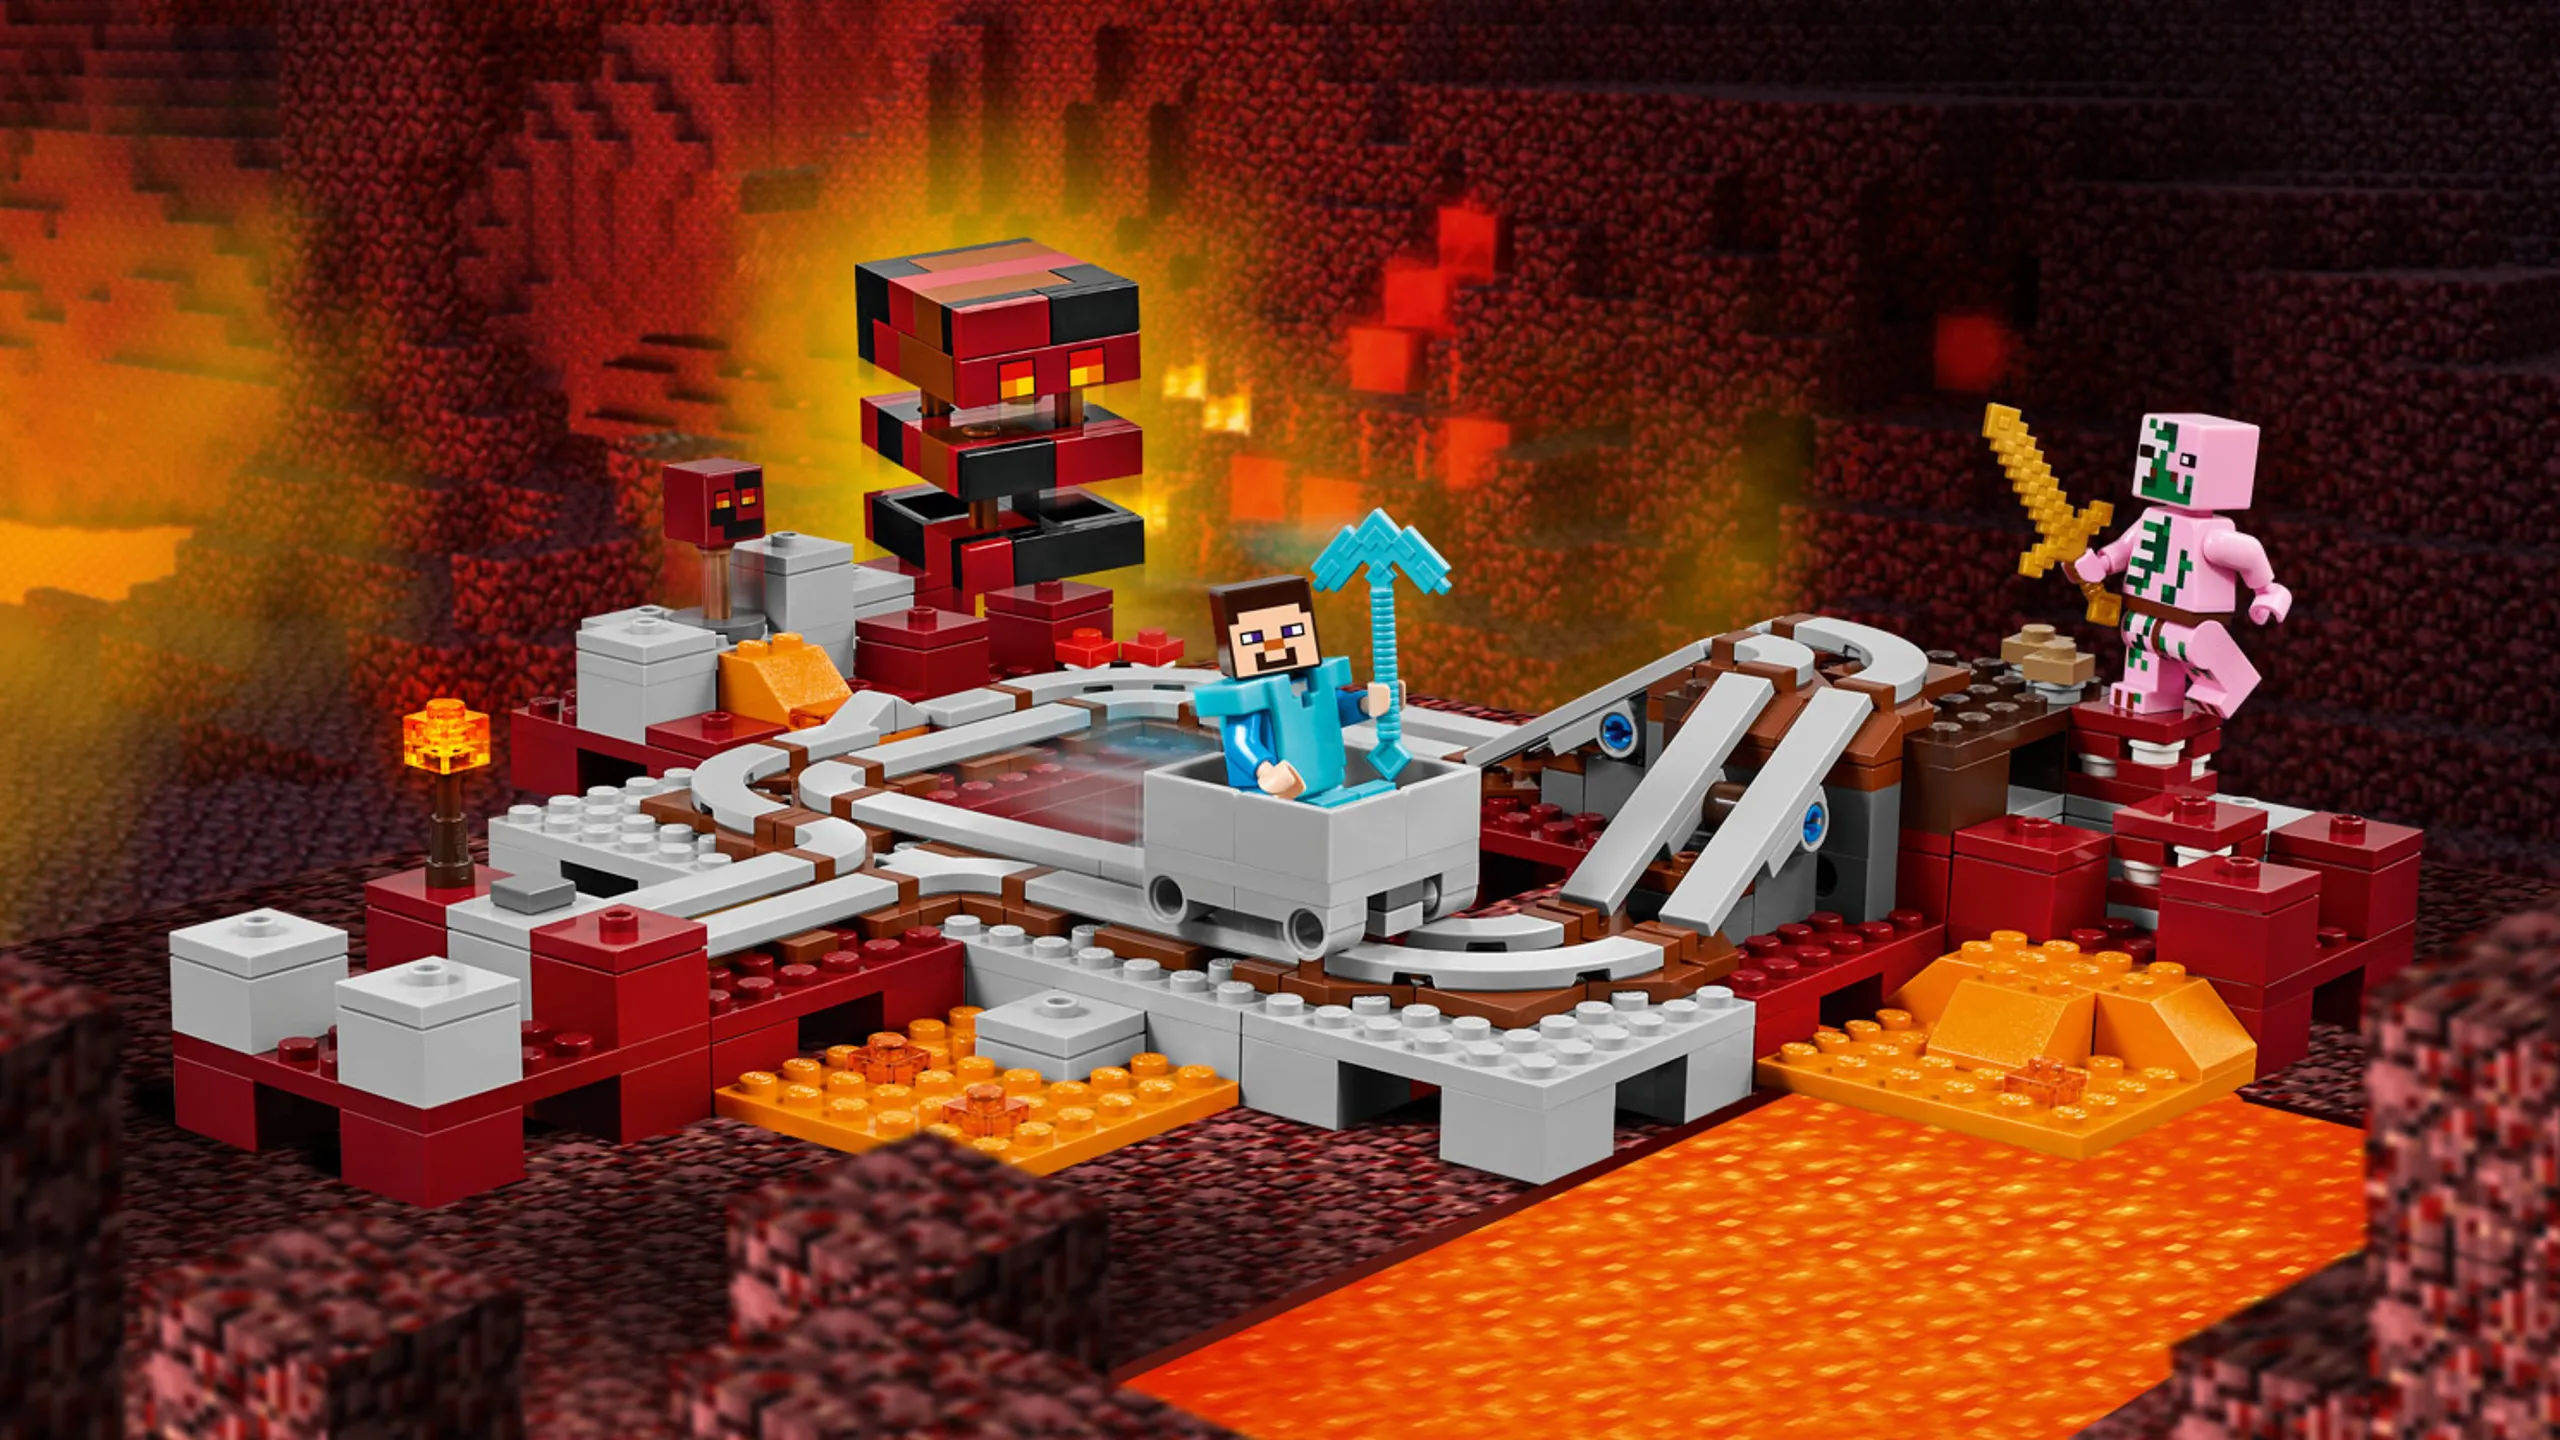 LEGO Minecraft - 21130 The Nether Railway - Steve has built an awesome rail system in the dangerous Nether biome, so he has put on his diamond armor, taken his diamond pickaxe and races down the track avoiding the molten lava, soul sand and the hostile zombie pigman.